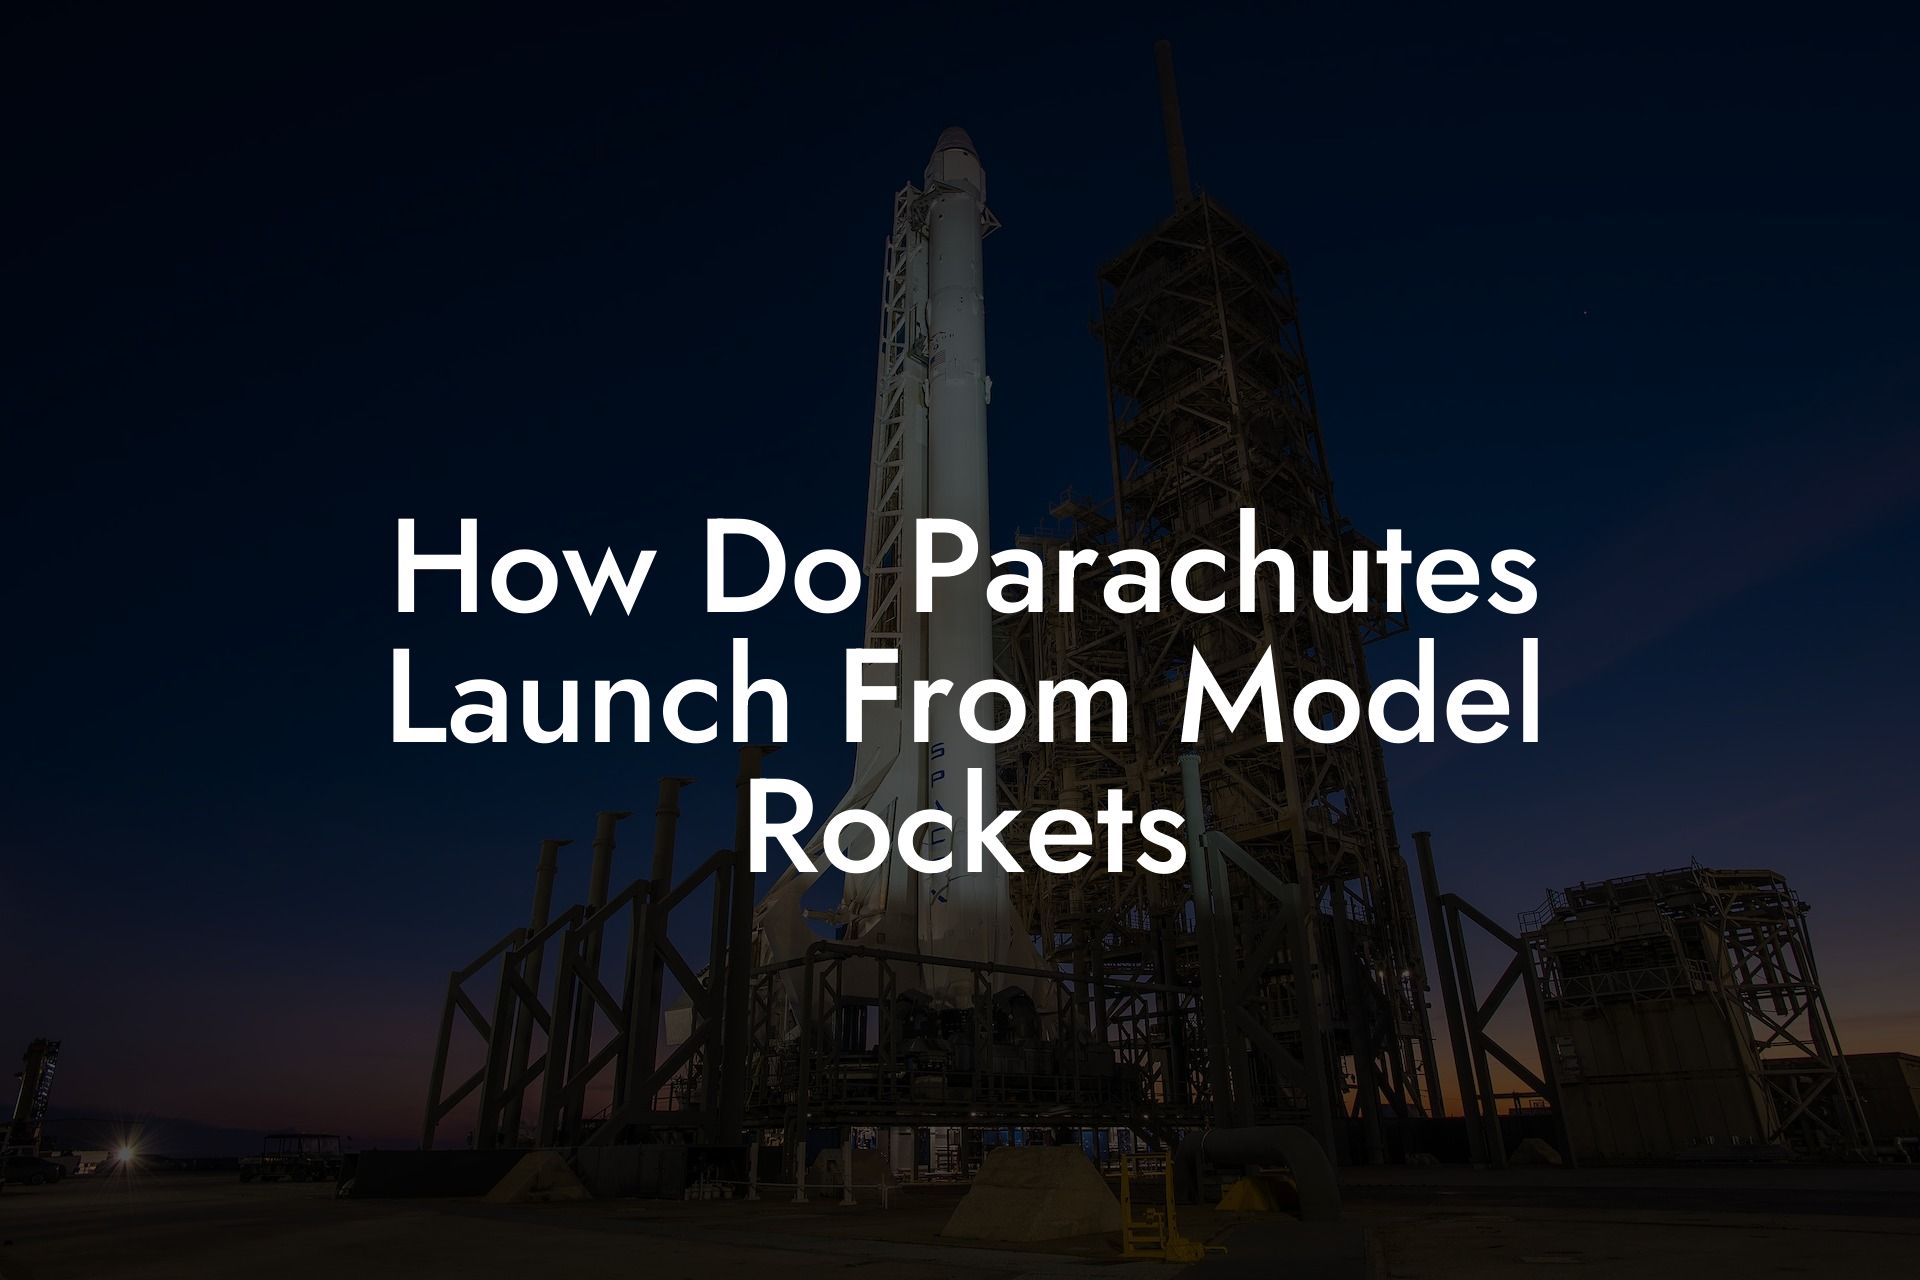 How Do Parachutes Launch From Model Rockets